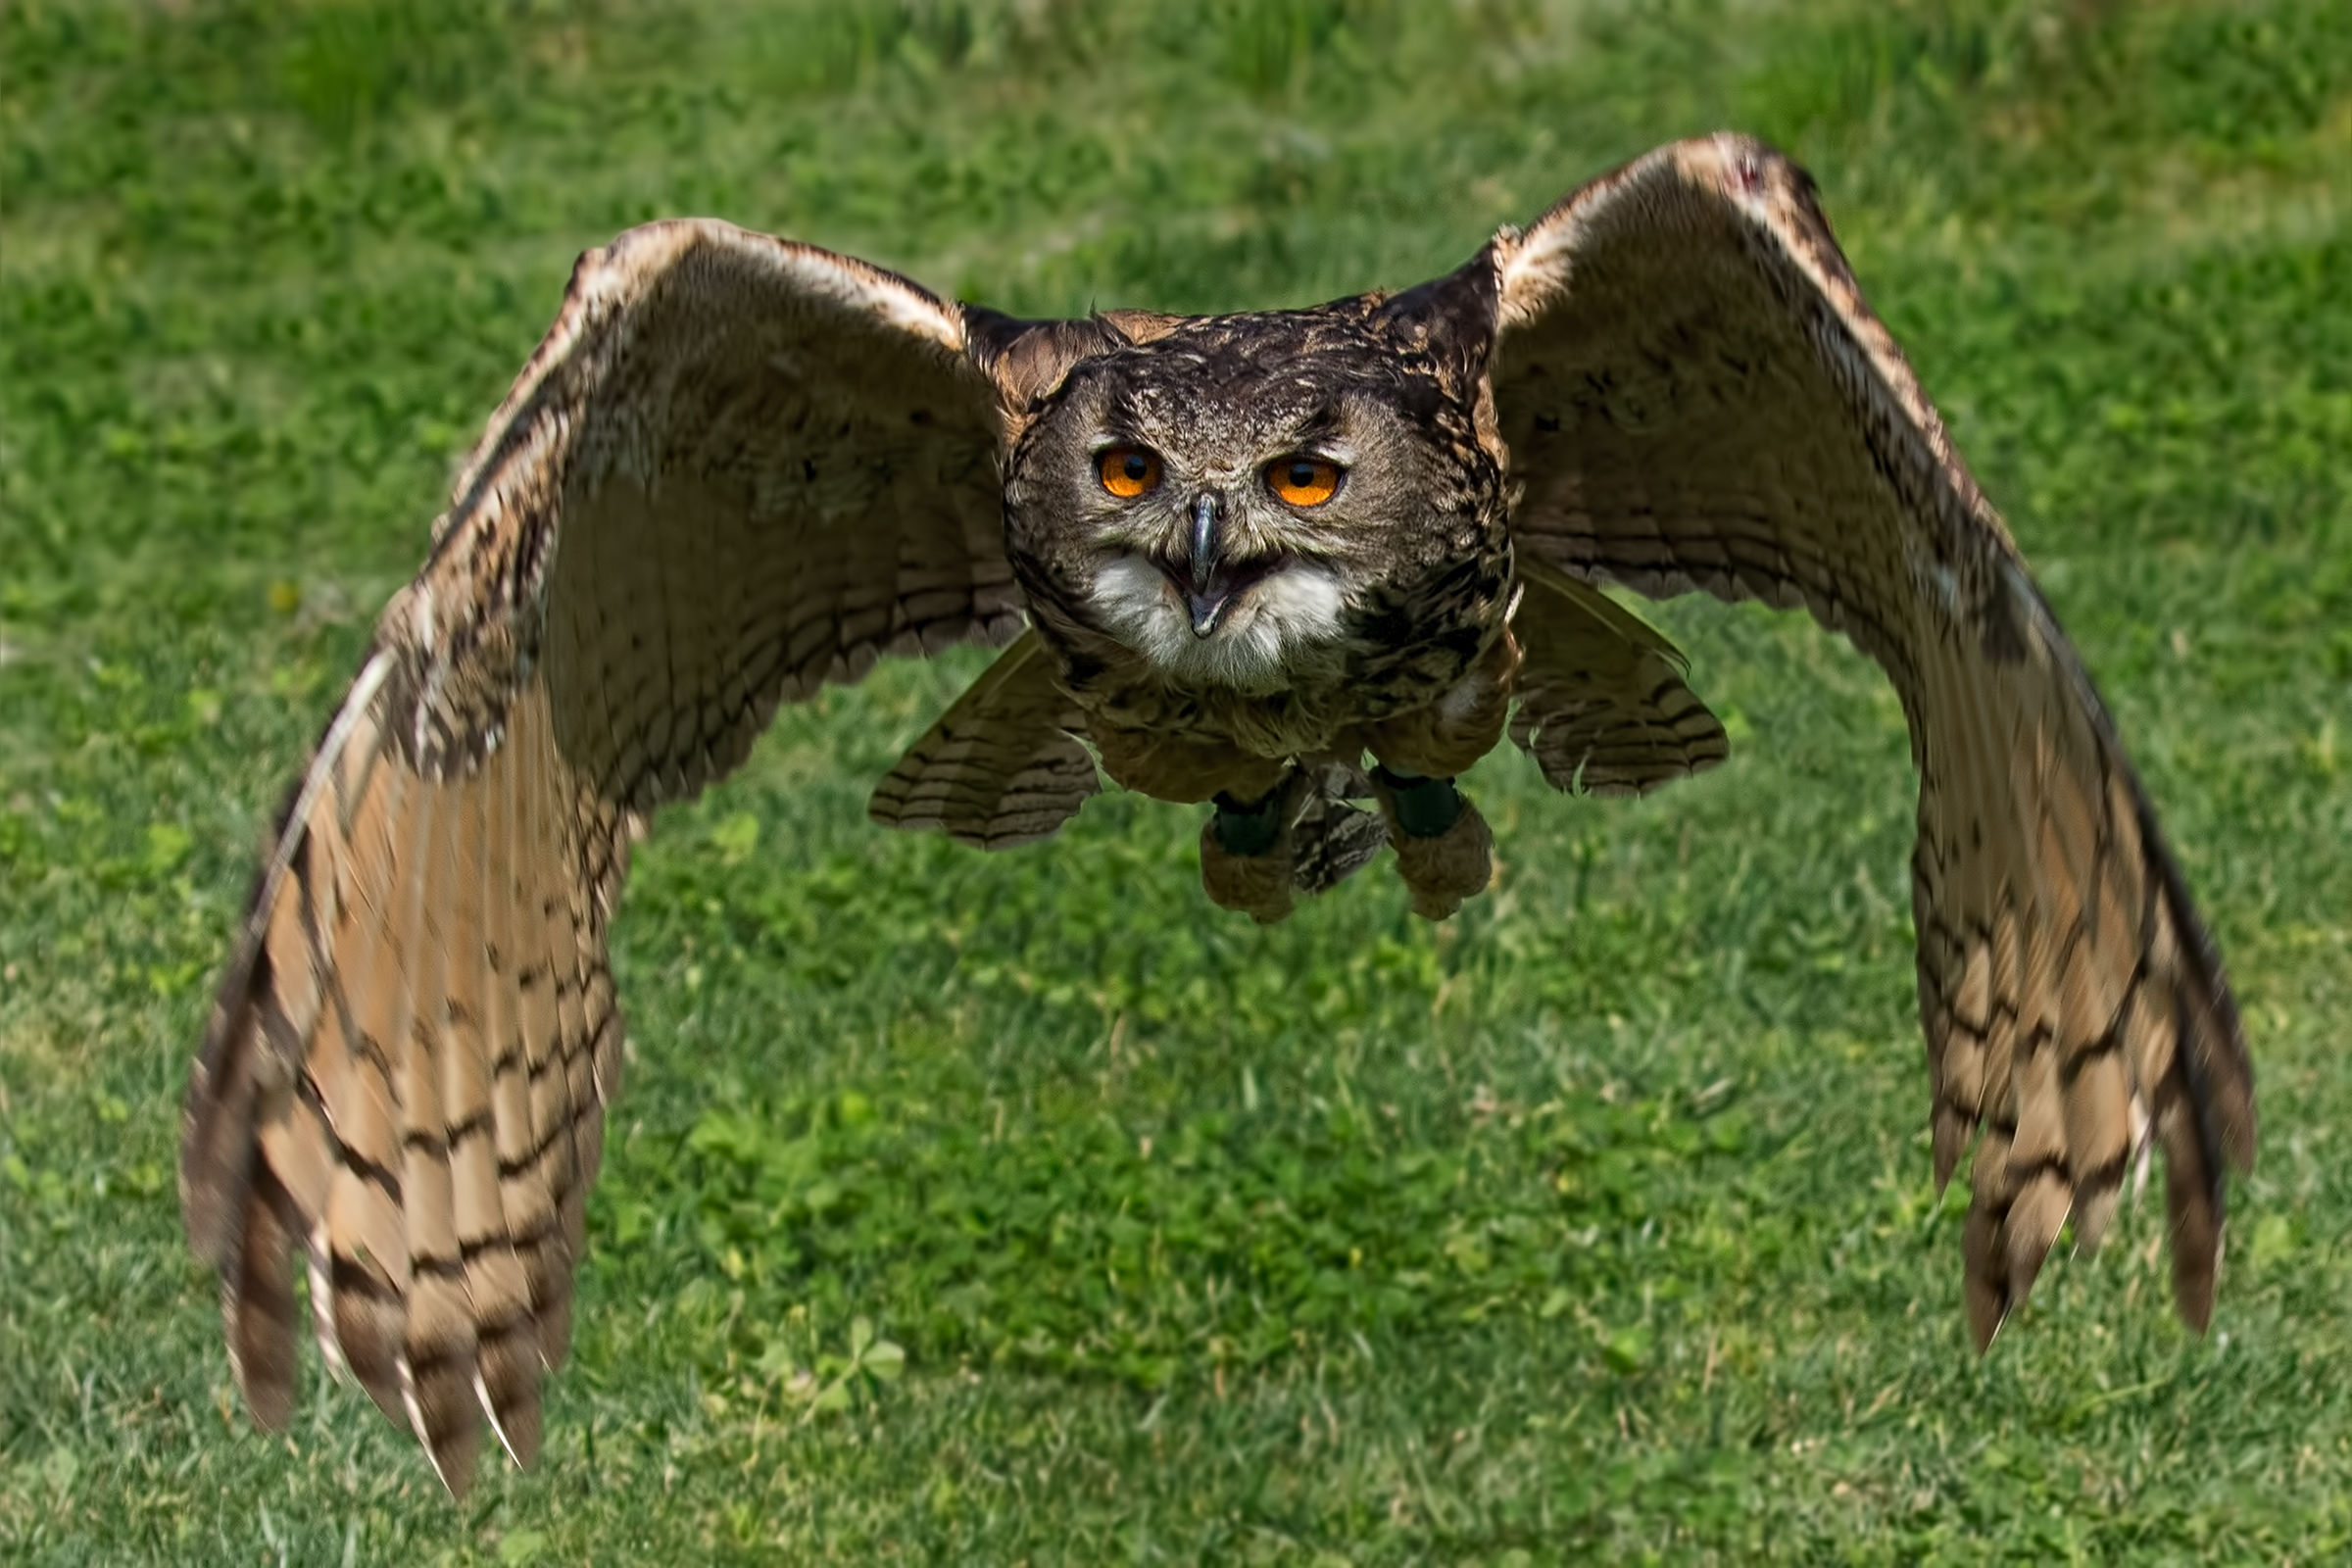 The flight of the Owl...